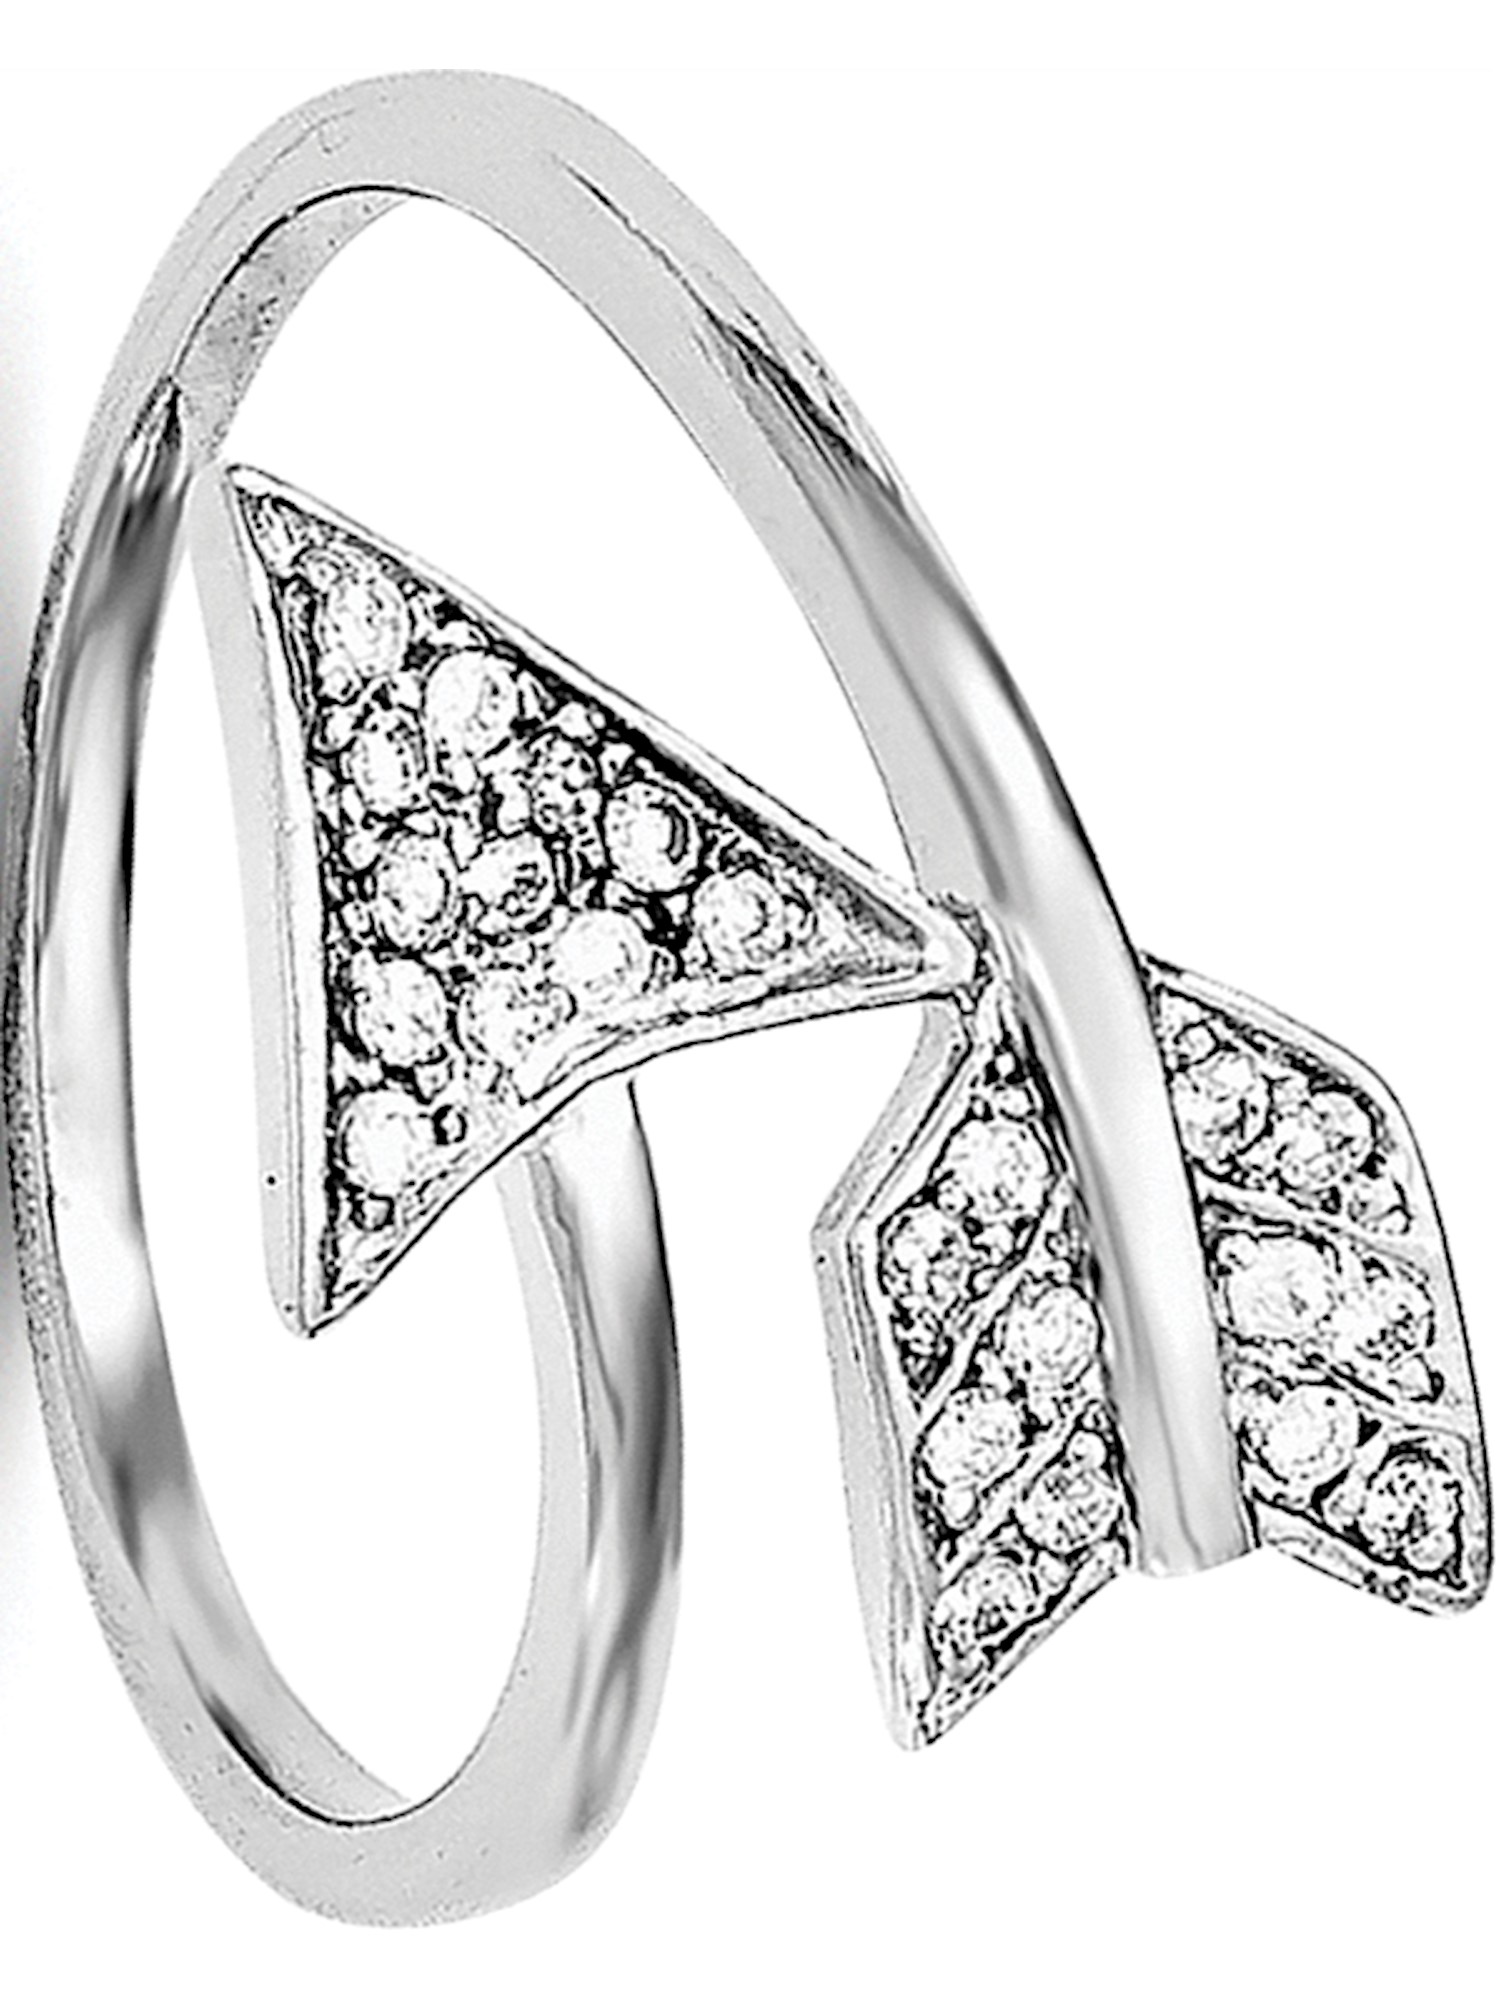 Arrow Heart Ring Sterling Silver Christmas  Band Fashion or Friendship Ring For Women and Girls Gift Cubic Zirconia Free Box